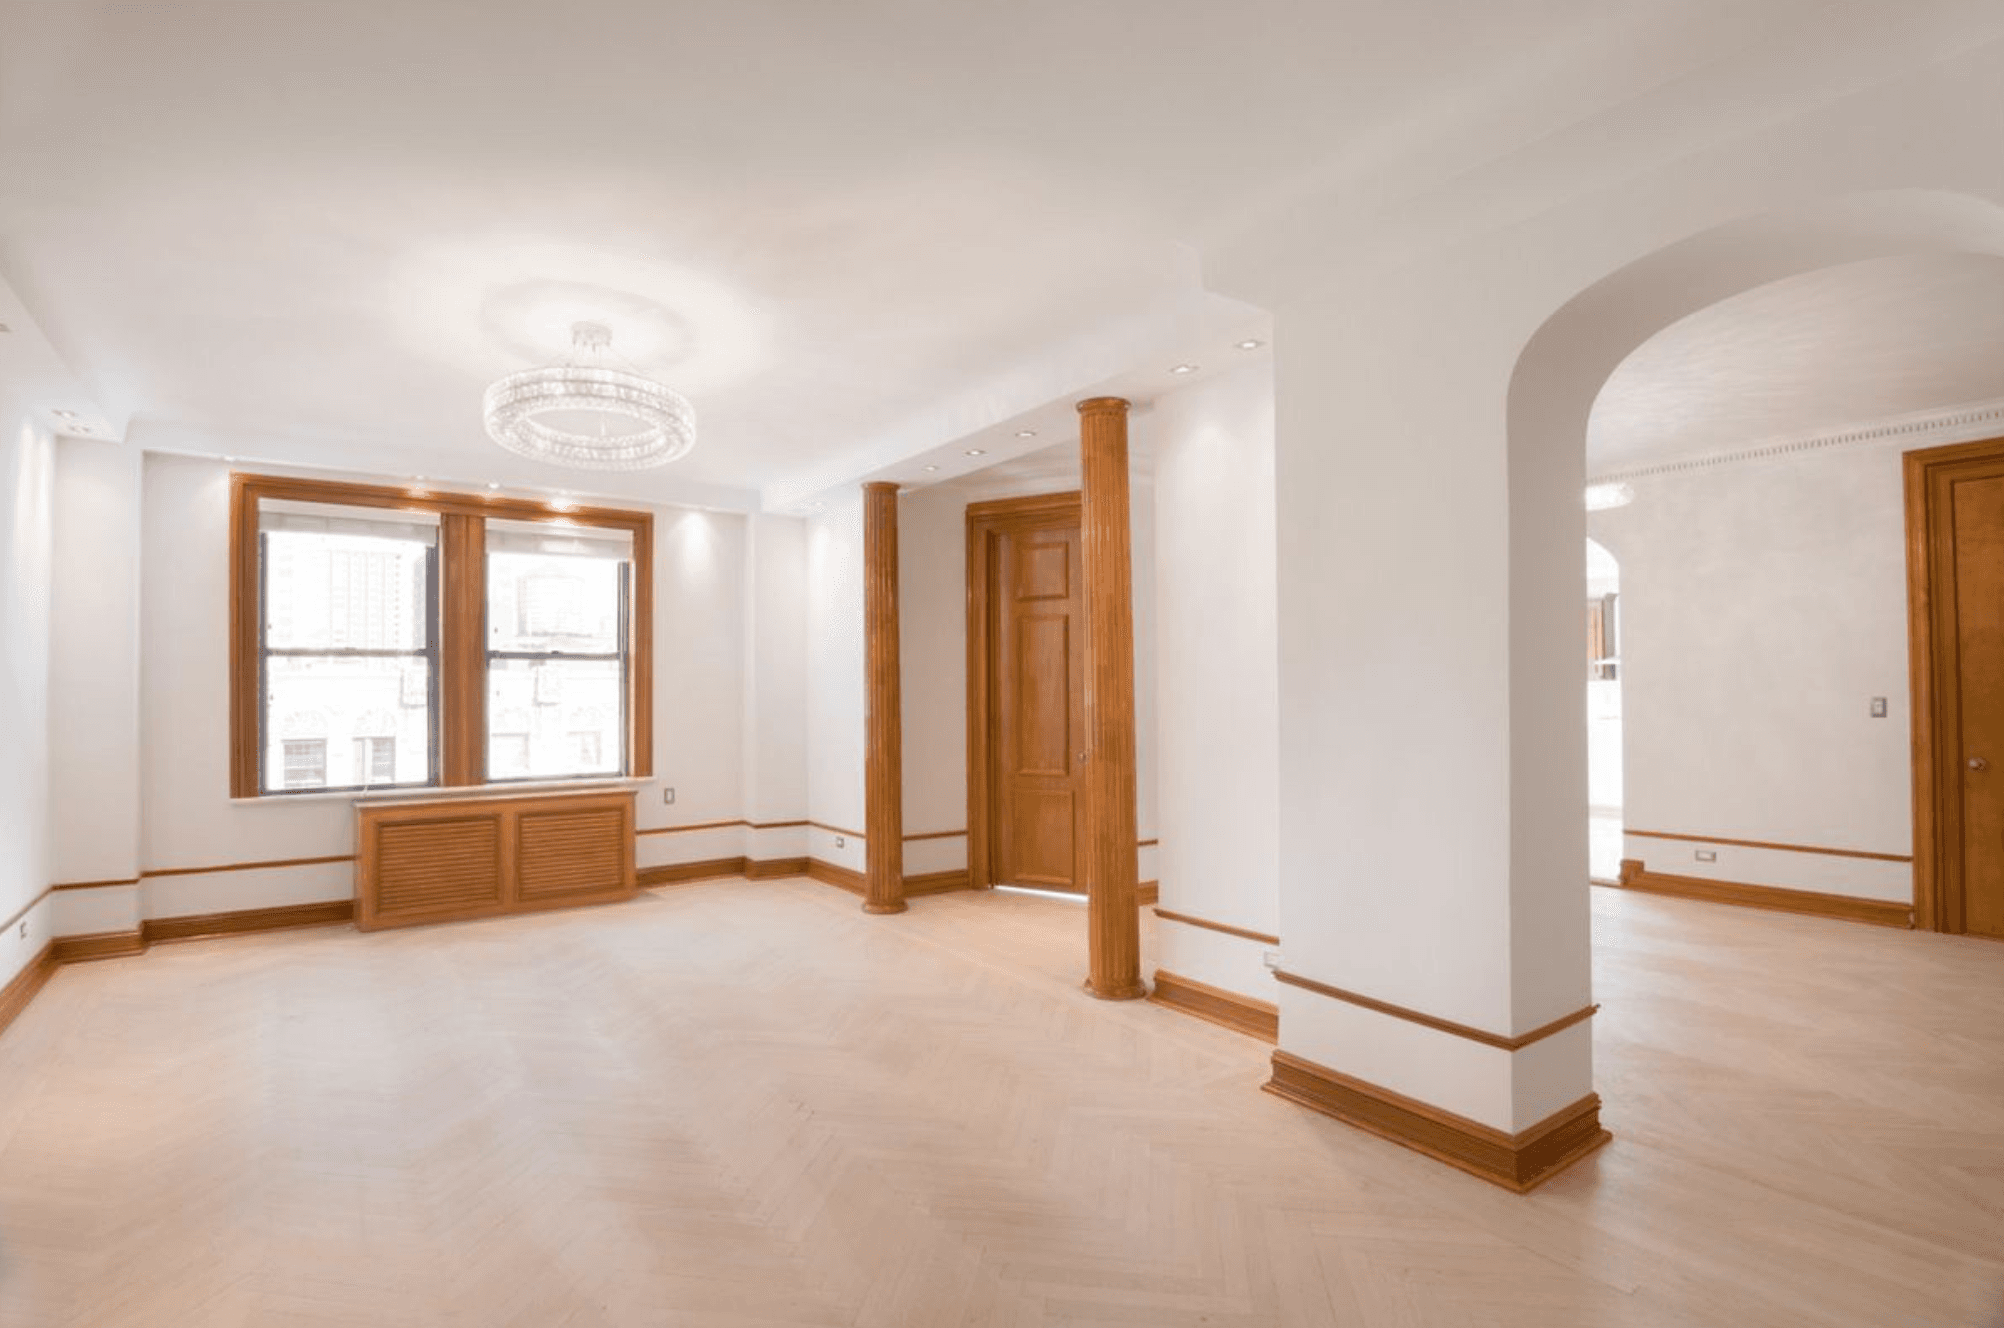 Upper West Side Beautiful Enormous Space with natural sunlight and finest details 4 bed / 3 bath